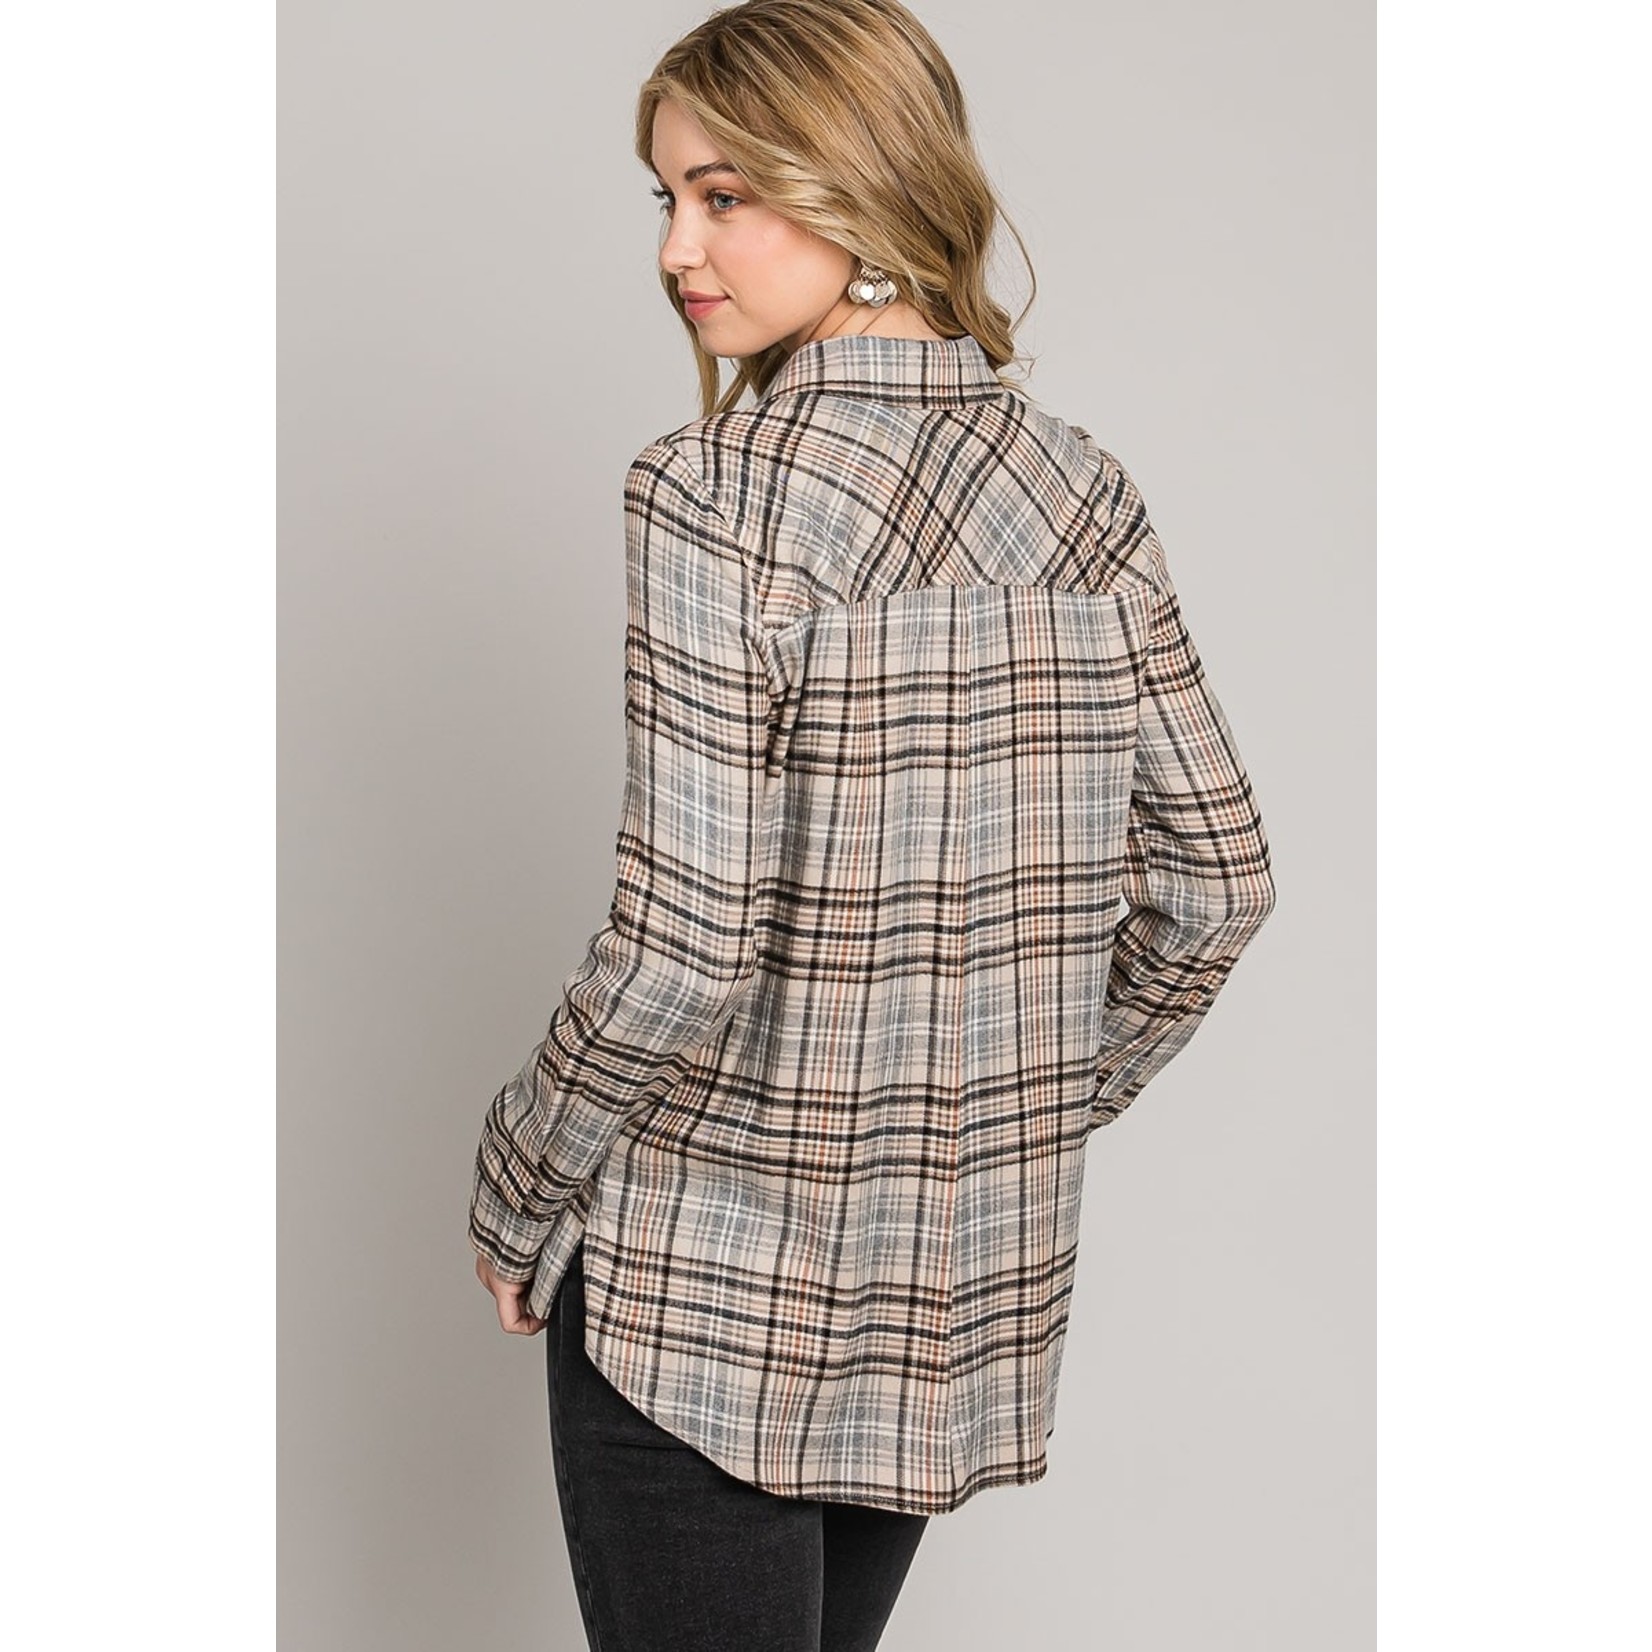 The Ada Flannel